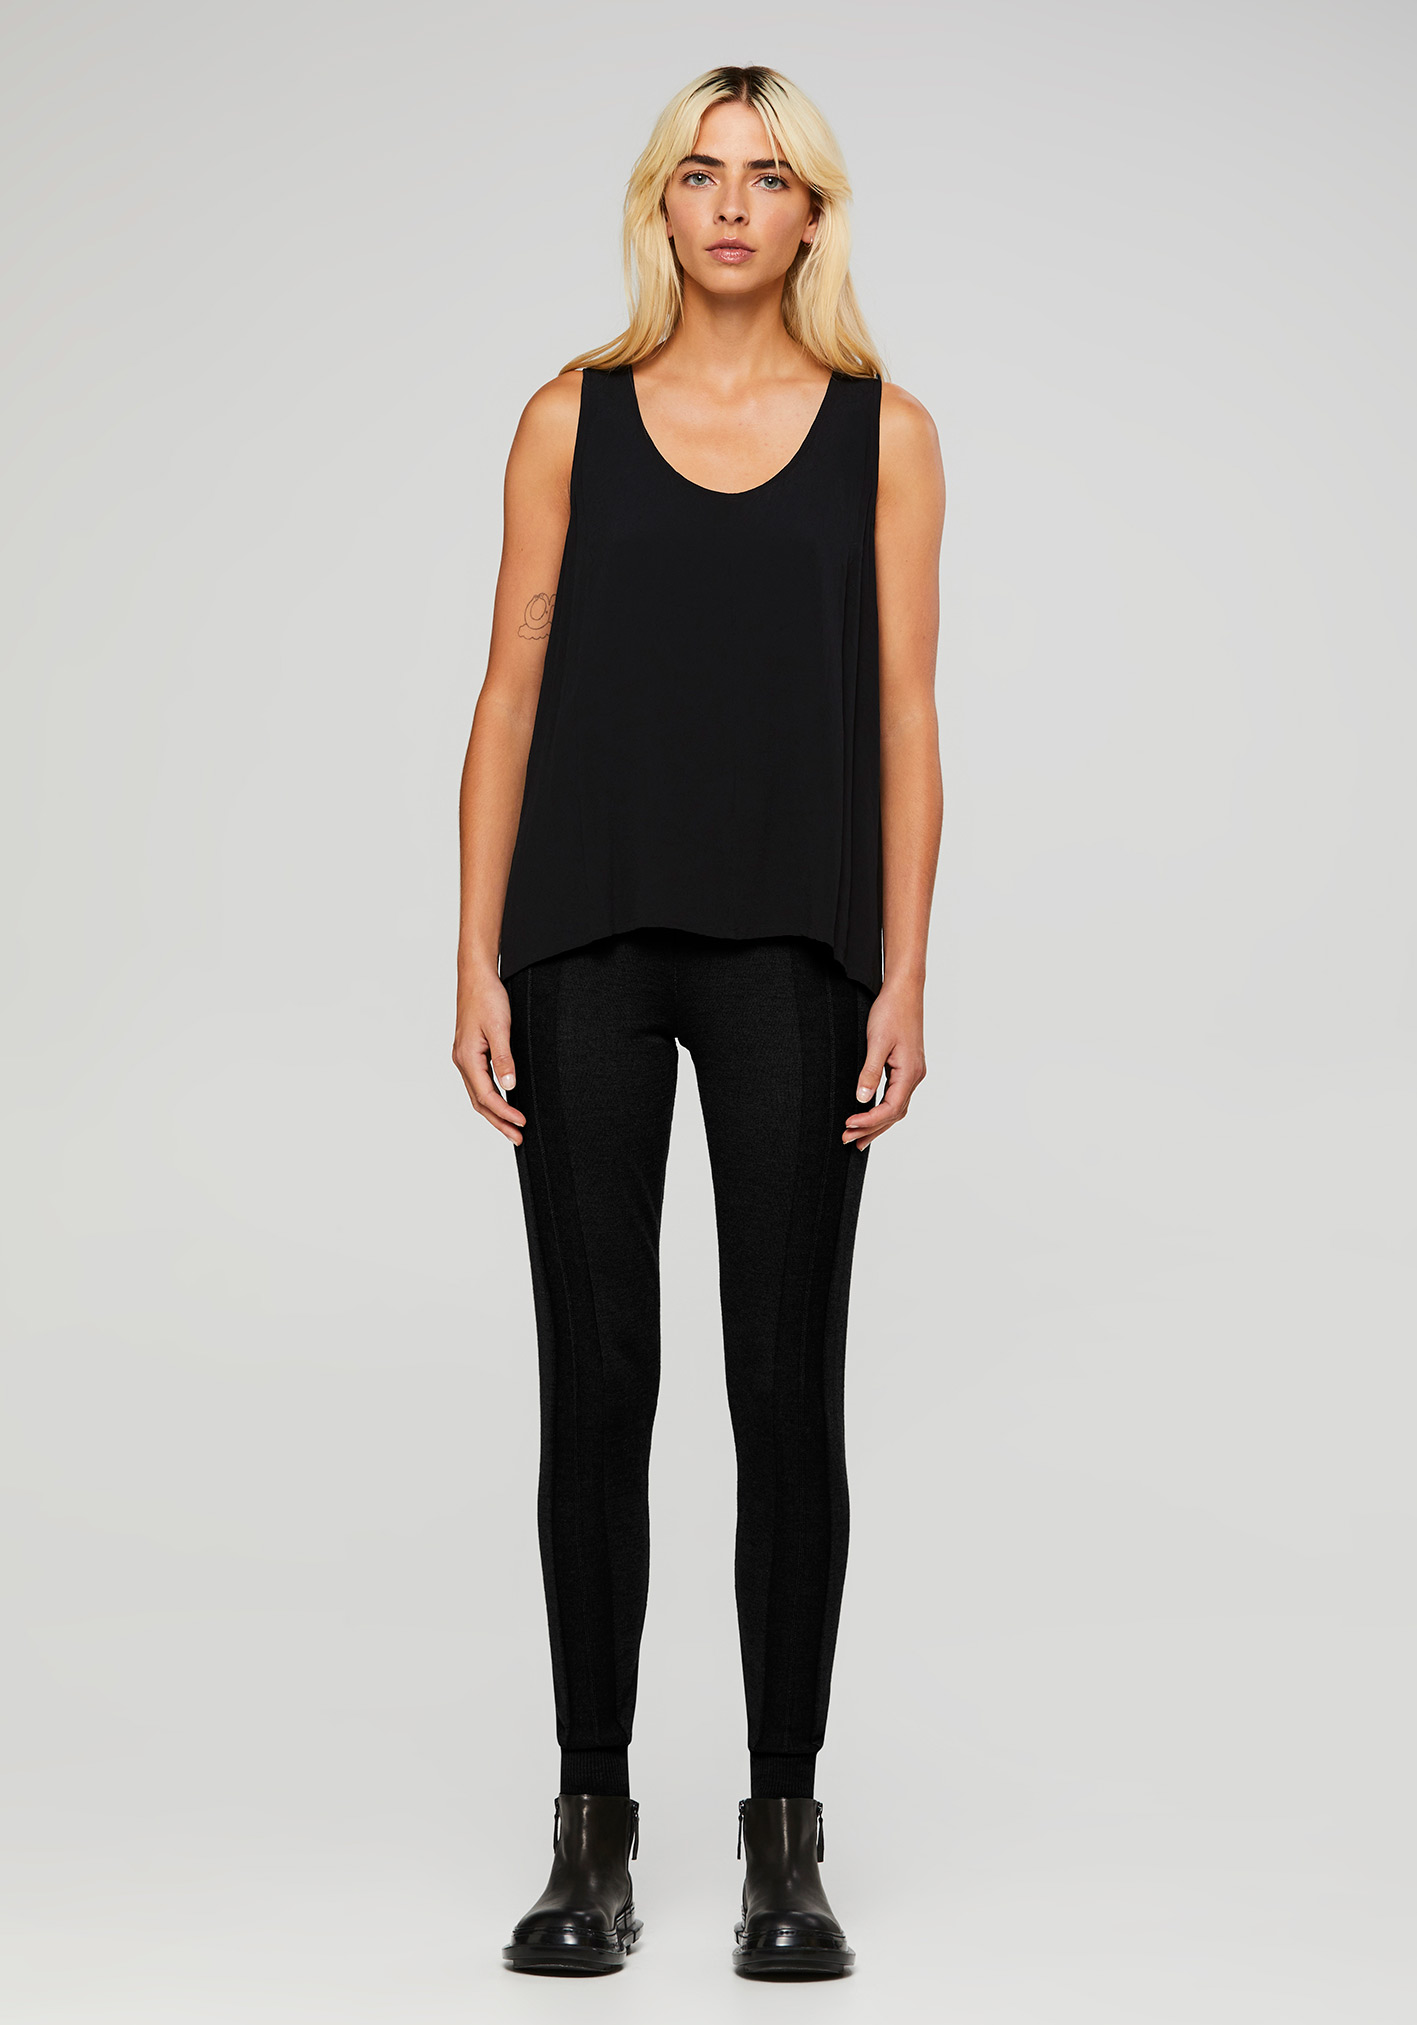 buy the latest Parallel Section Legging online